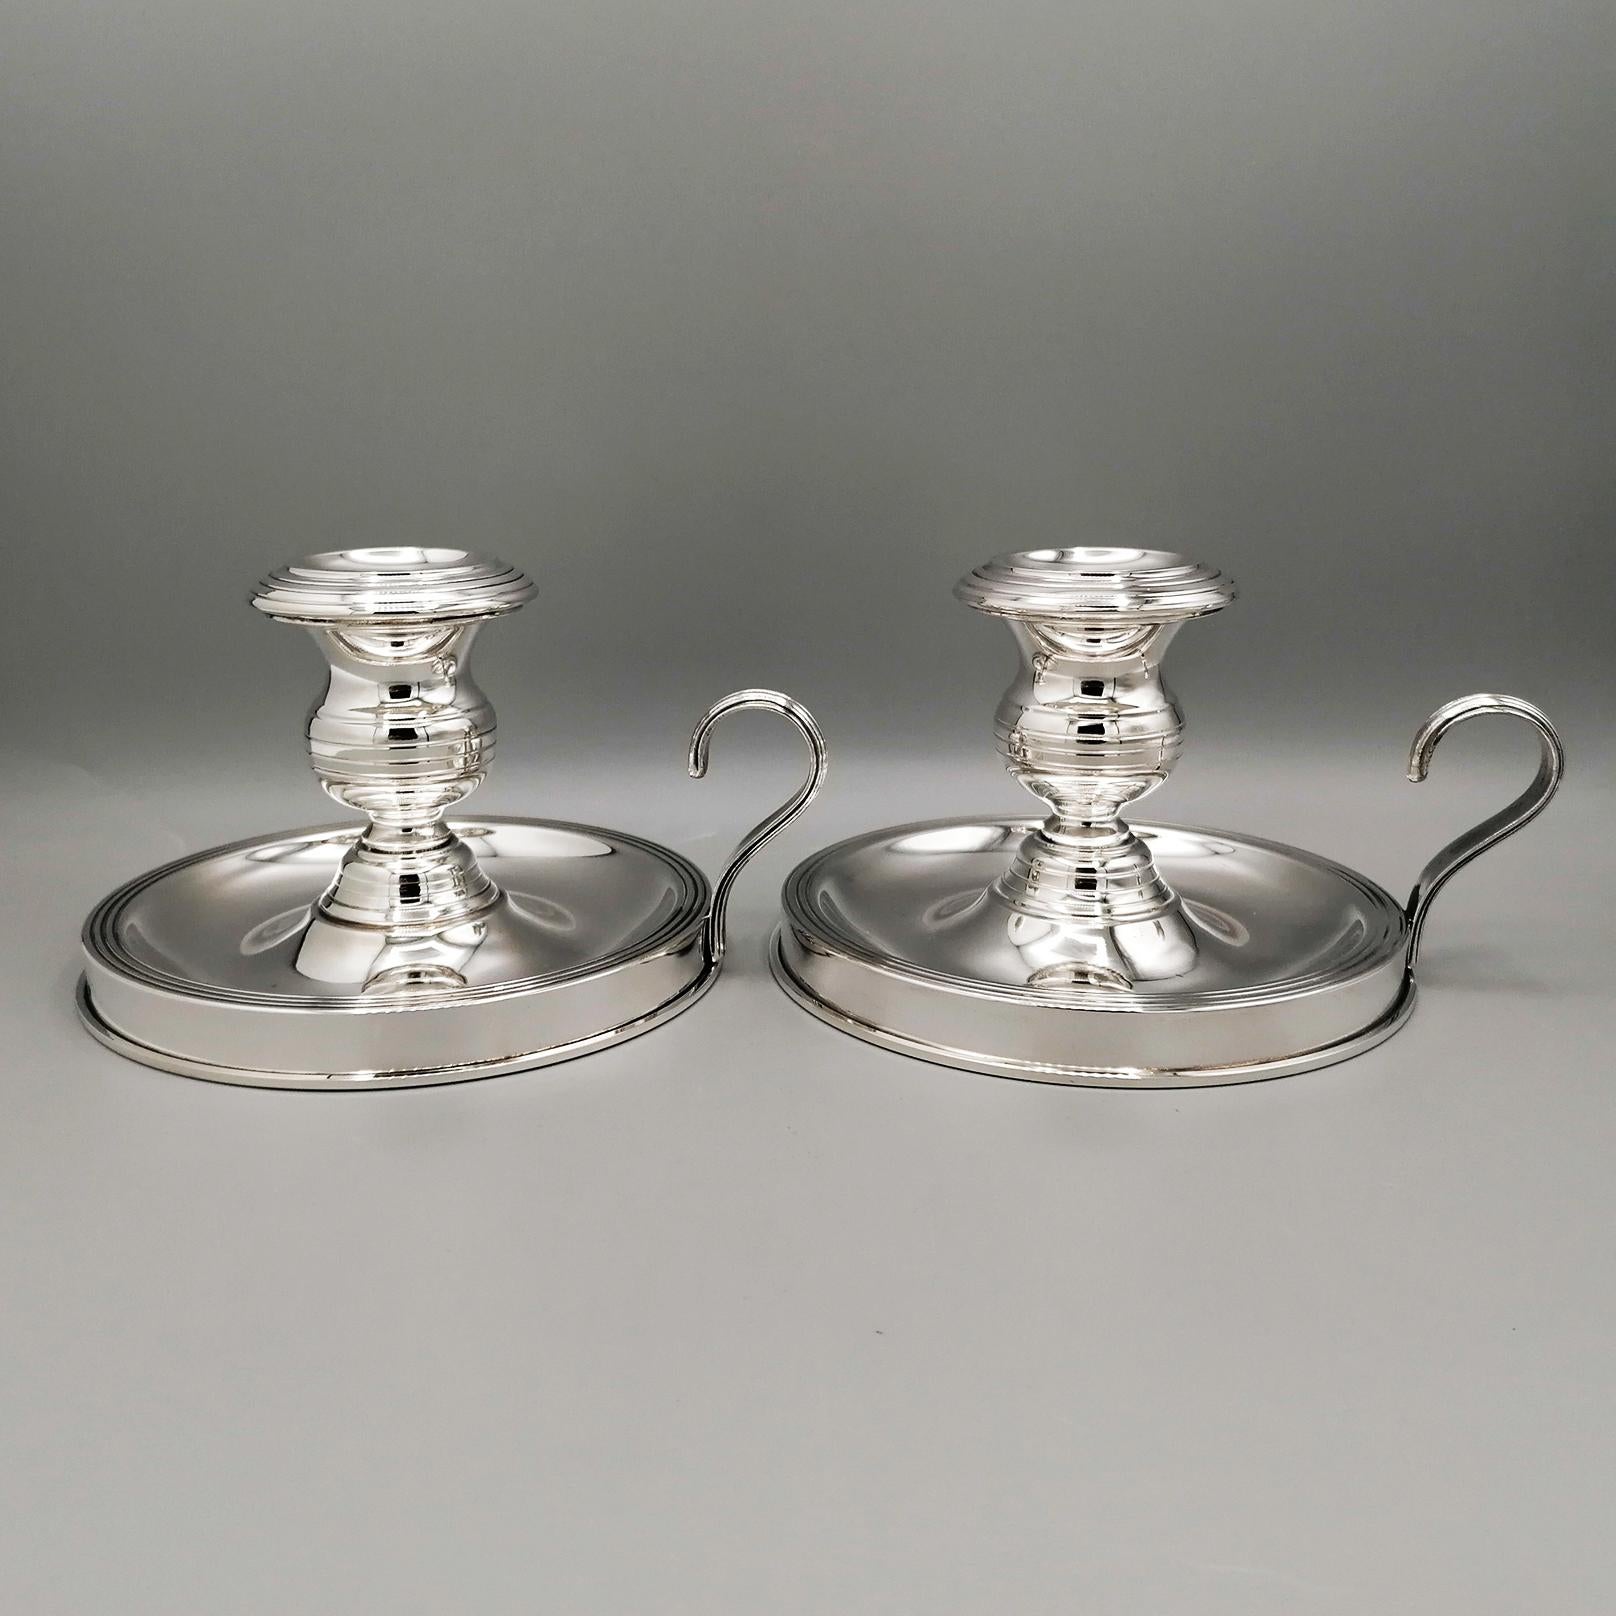 Pair of George III style sterling silver chambersticks.
Round-shaped candlesticks, they are made with a thick silver plate and then grooved both in the lower part of the 